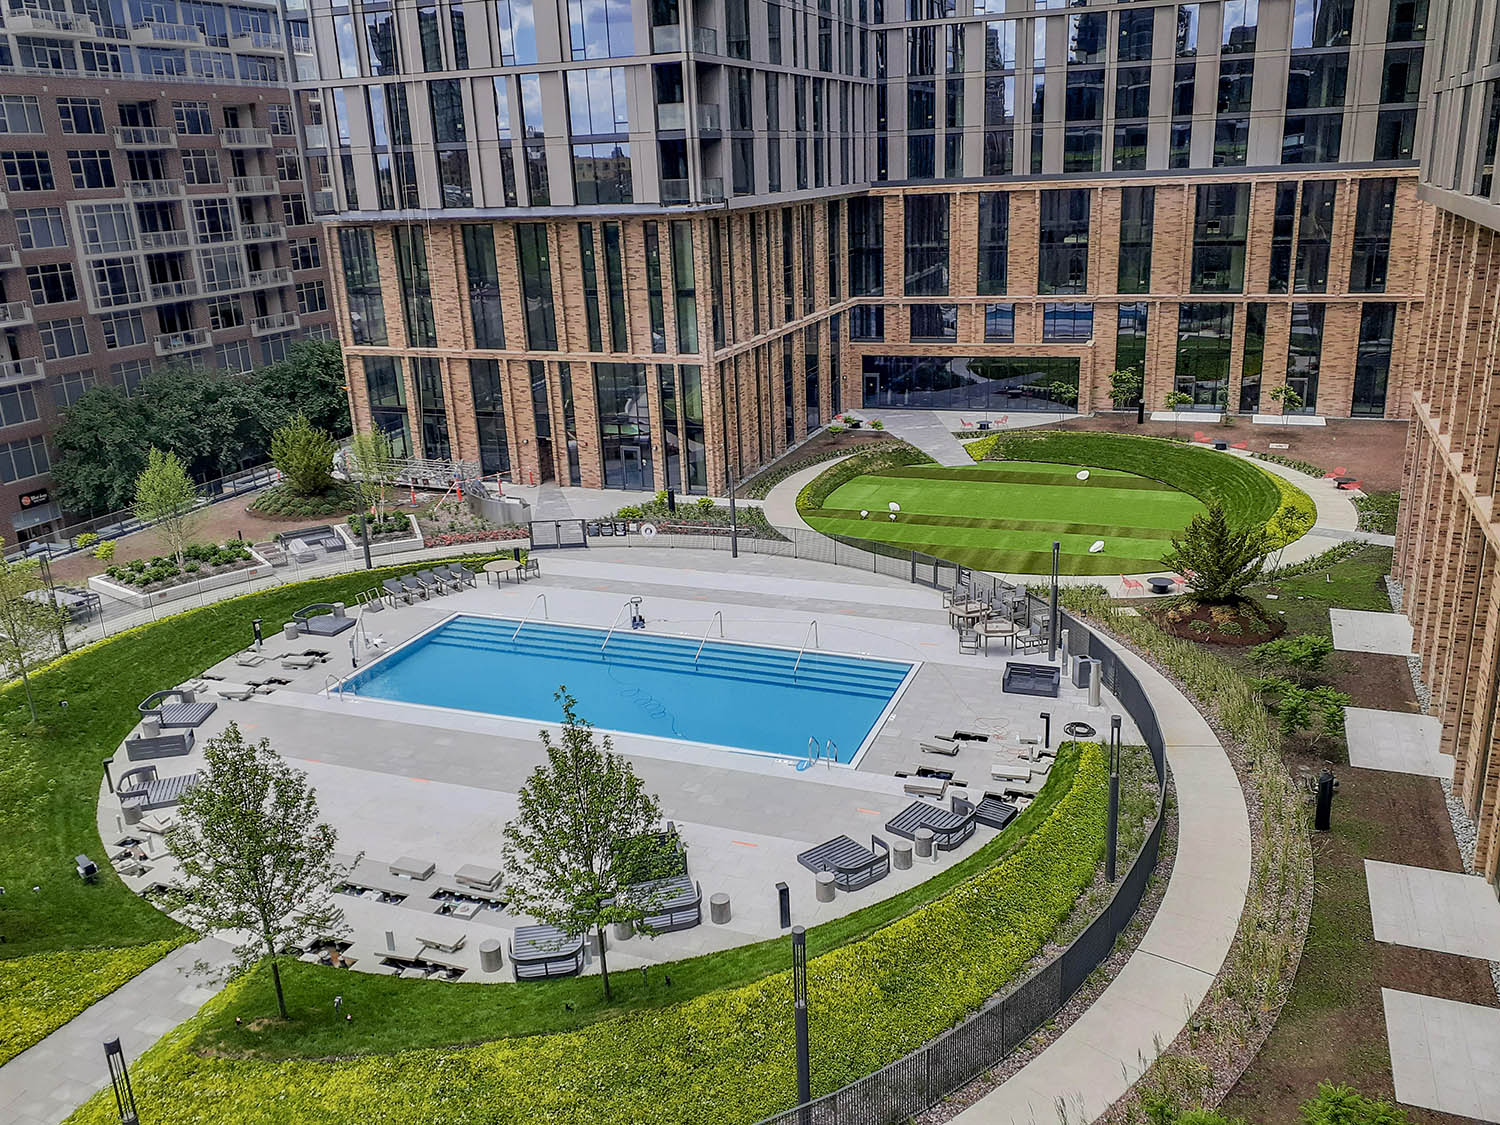 Amenity Deck at Porte. Image by Lendlease and The John Buck Company